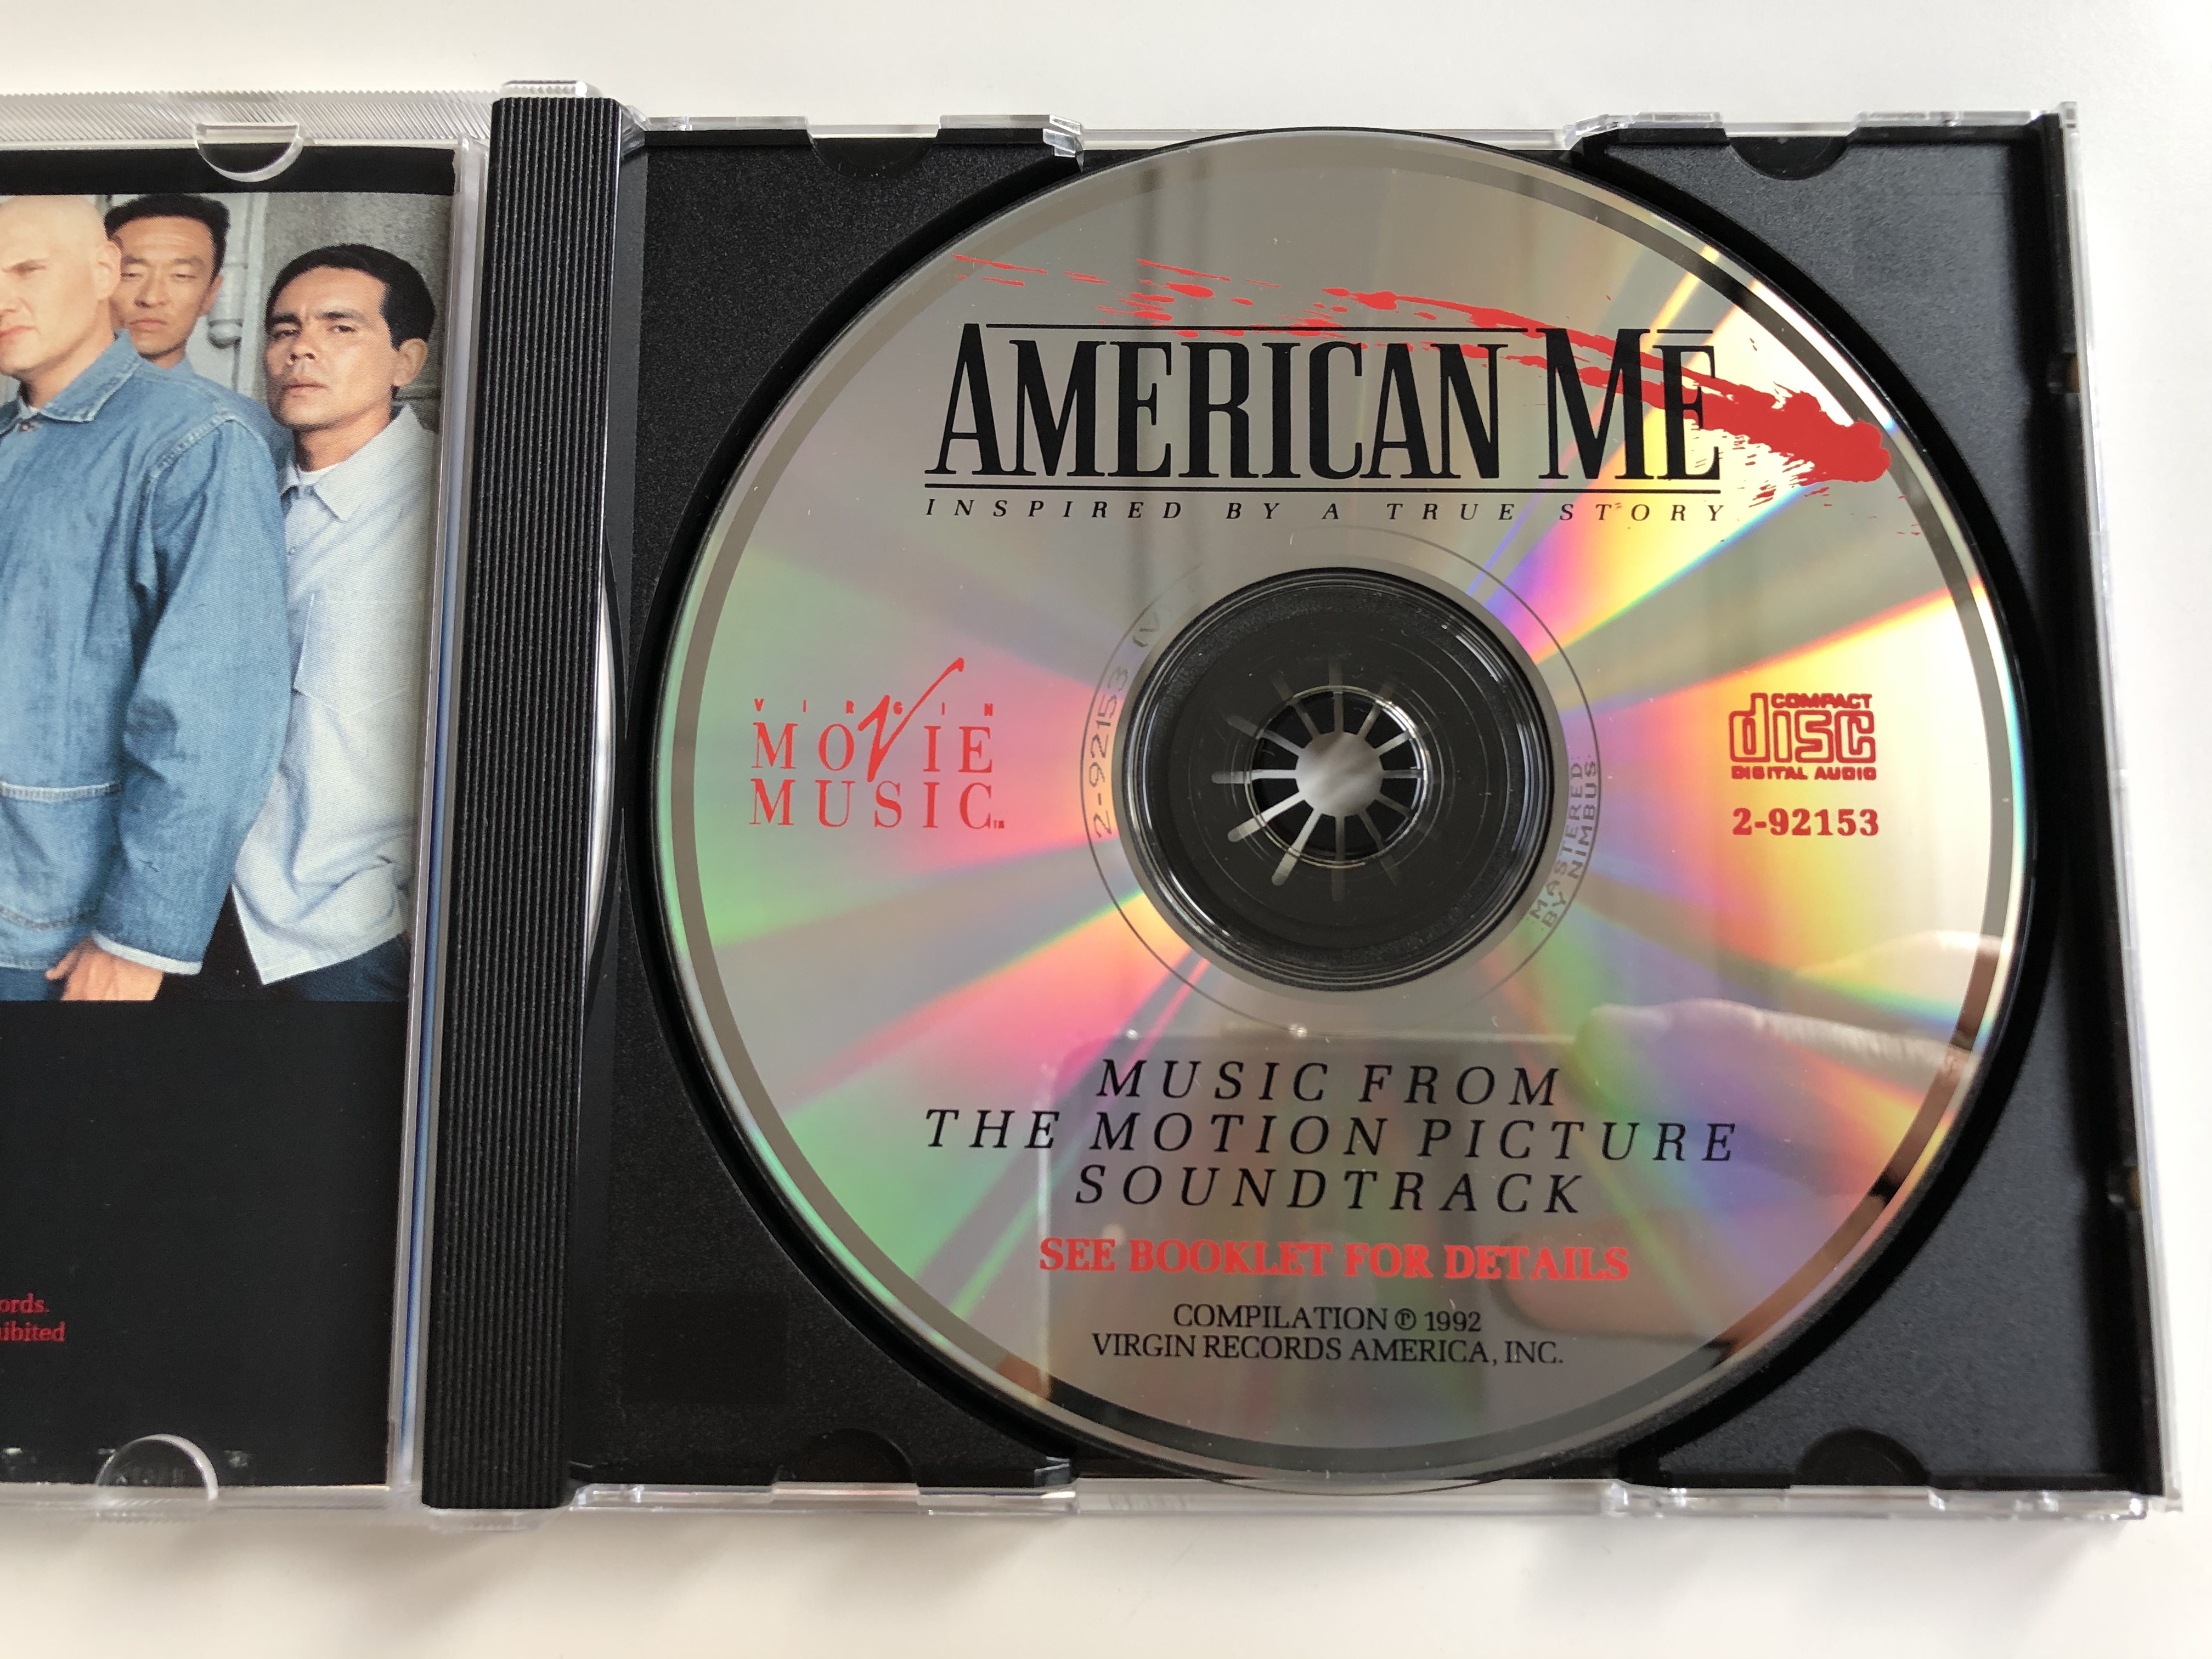 music-from-the-motion-picture-soundtrack-edward-james-olmos-american-me-inspired-by-a-true-story-universal-music-audio-cd-1992-2-92153-4-.jpg